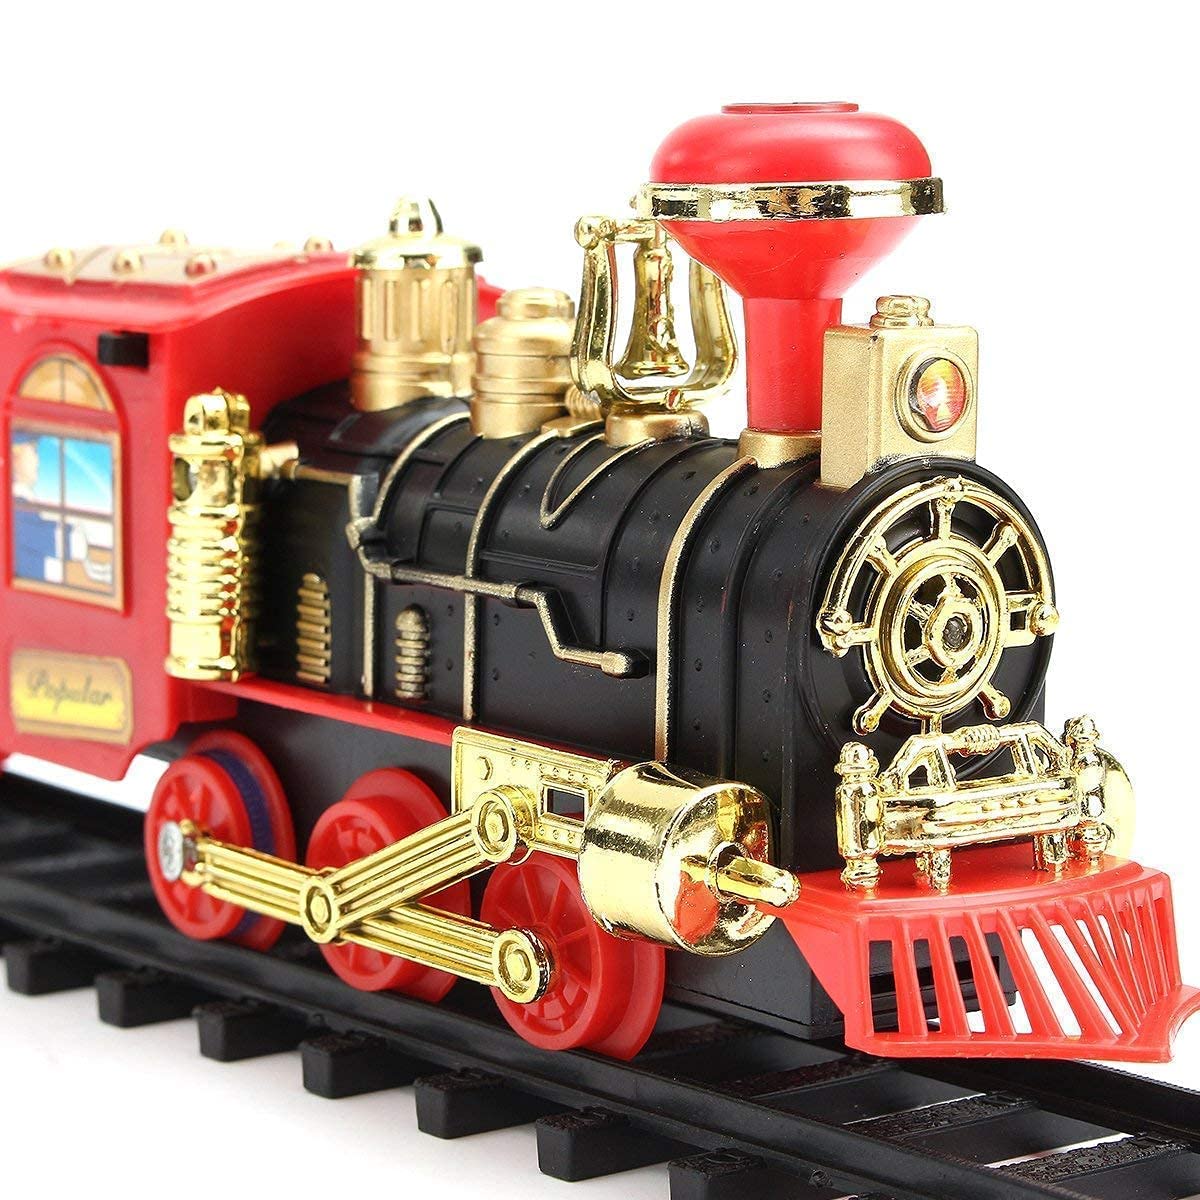 MM TOYS Choo Choo Toy Train with Track Toy Set , Classic Train With Real Smoke , Lights And Kids Aged 4 Years and Above